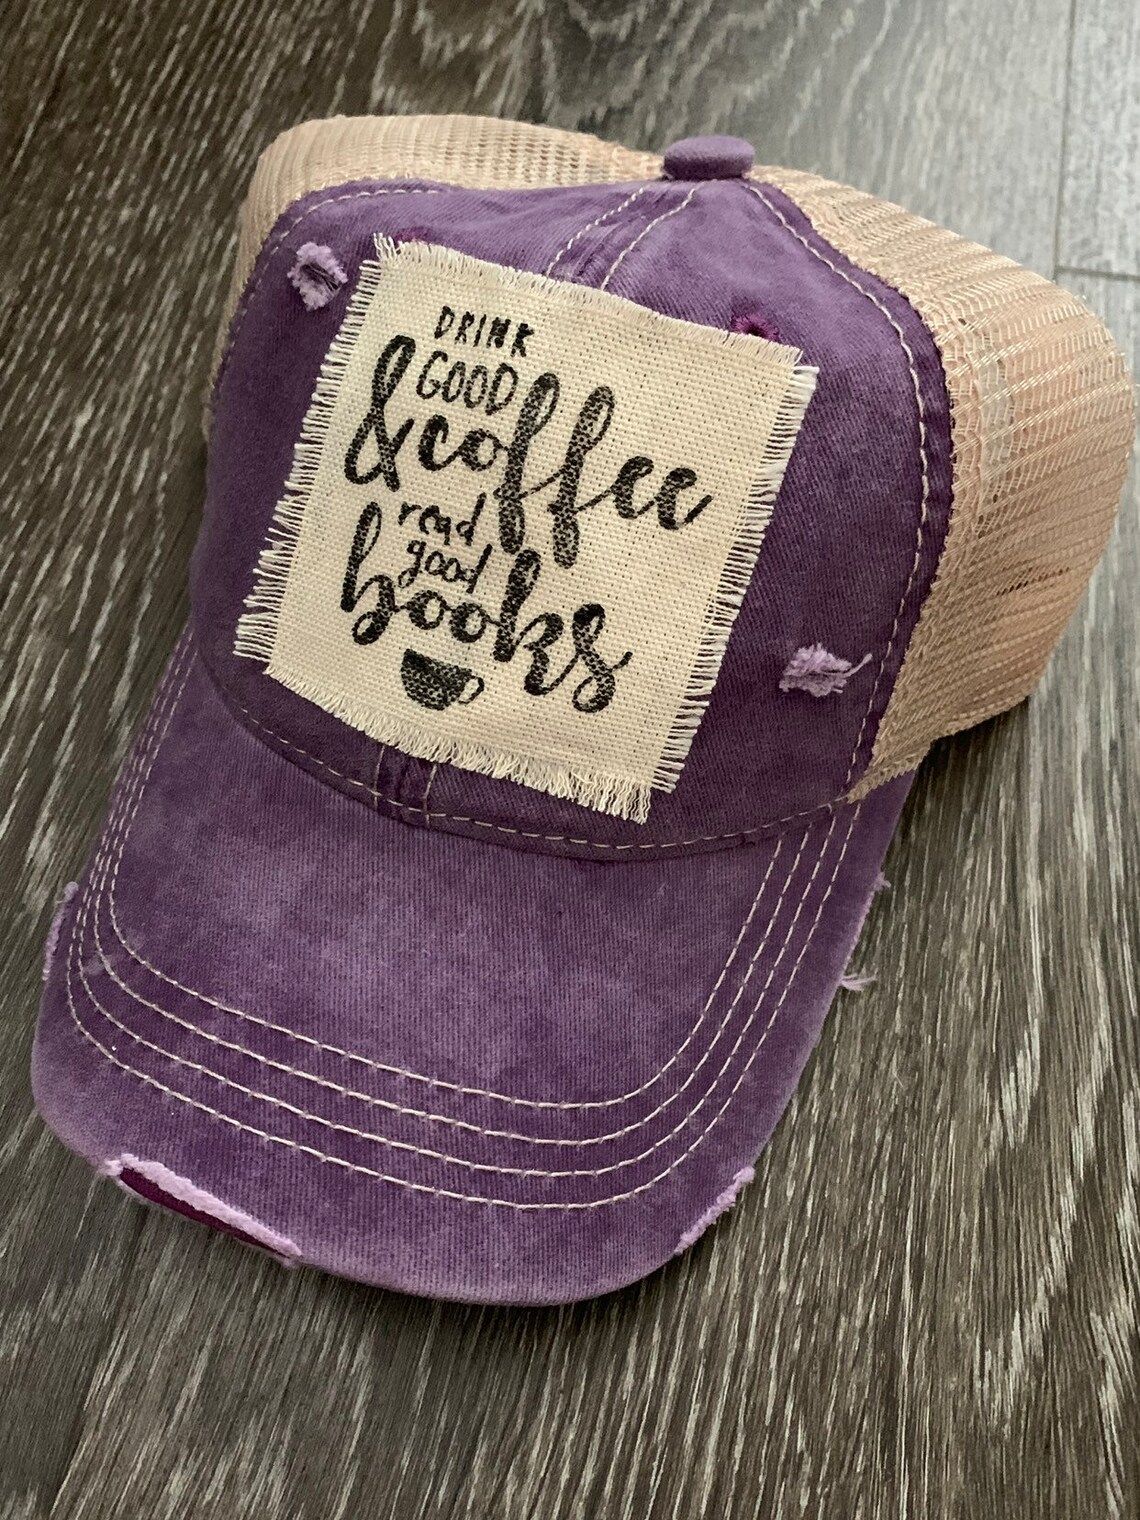 hat that says "drink good coffee & read good books" 